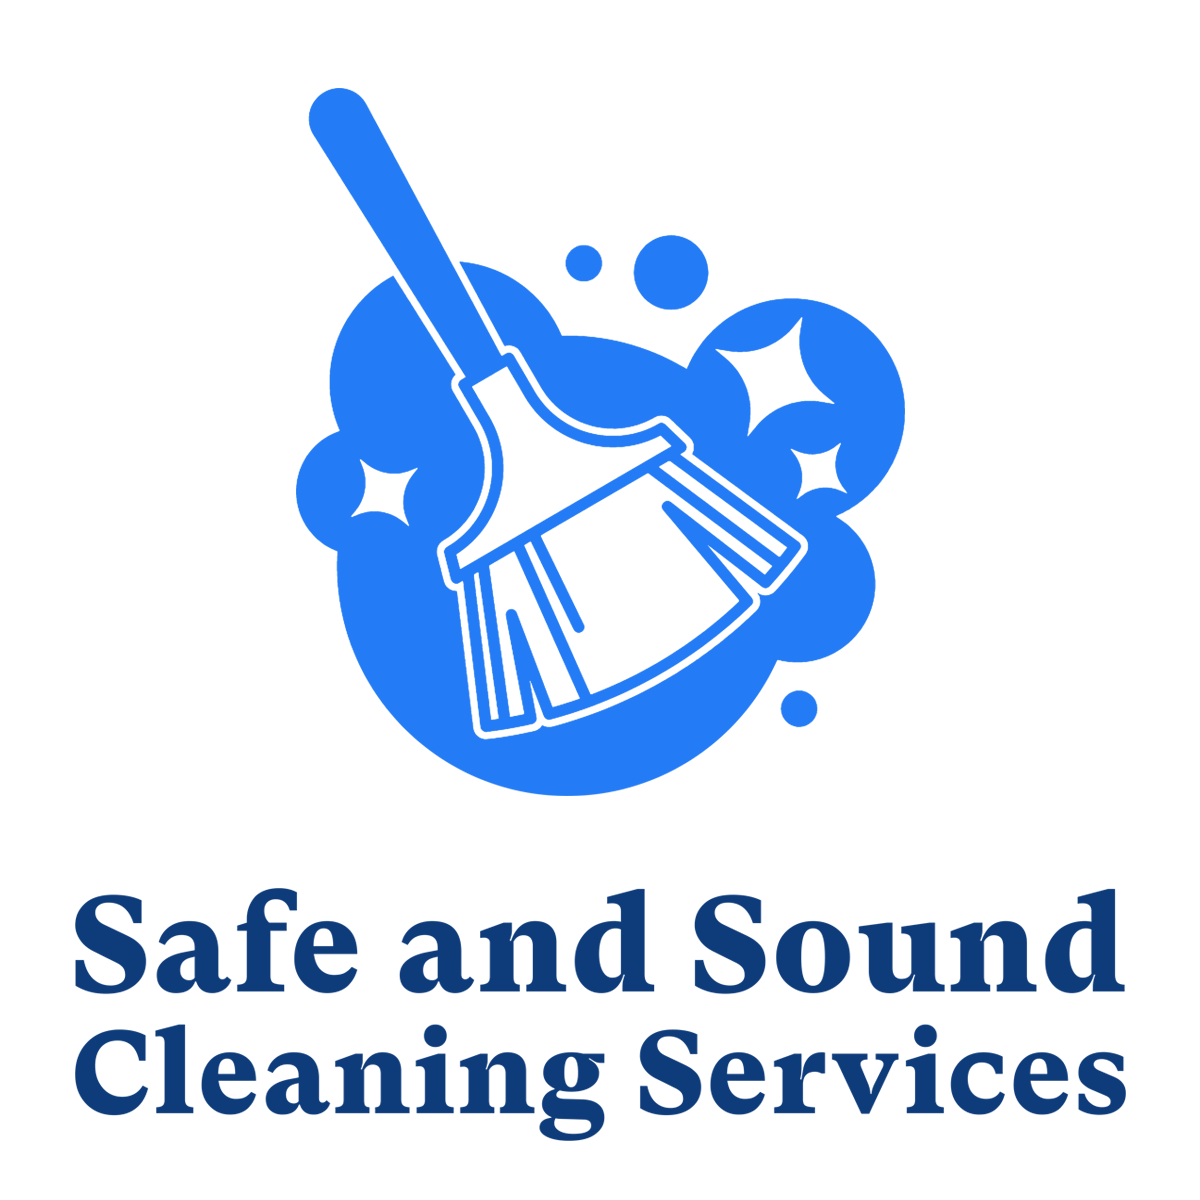 Safe and Sound Cleaning Services